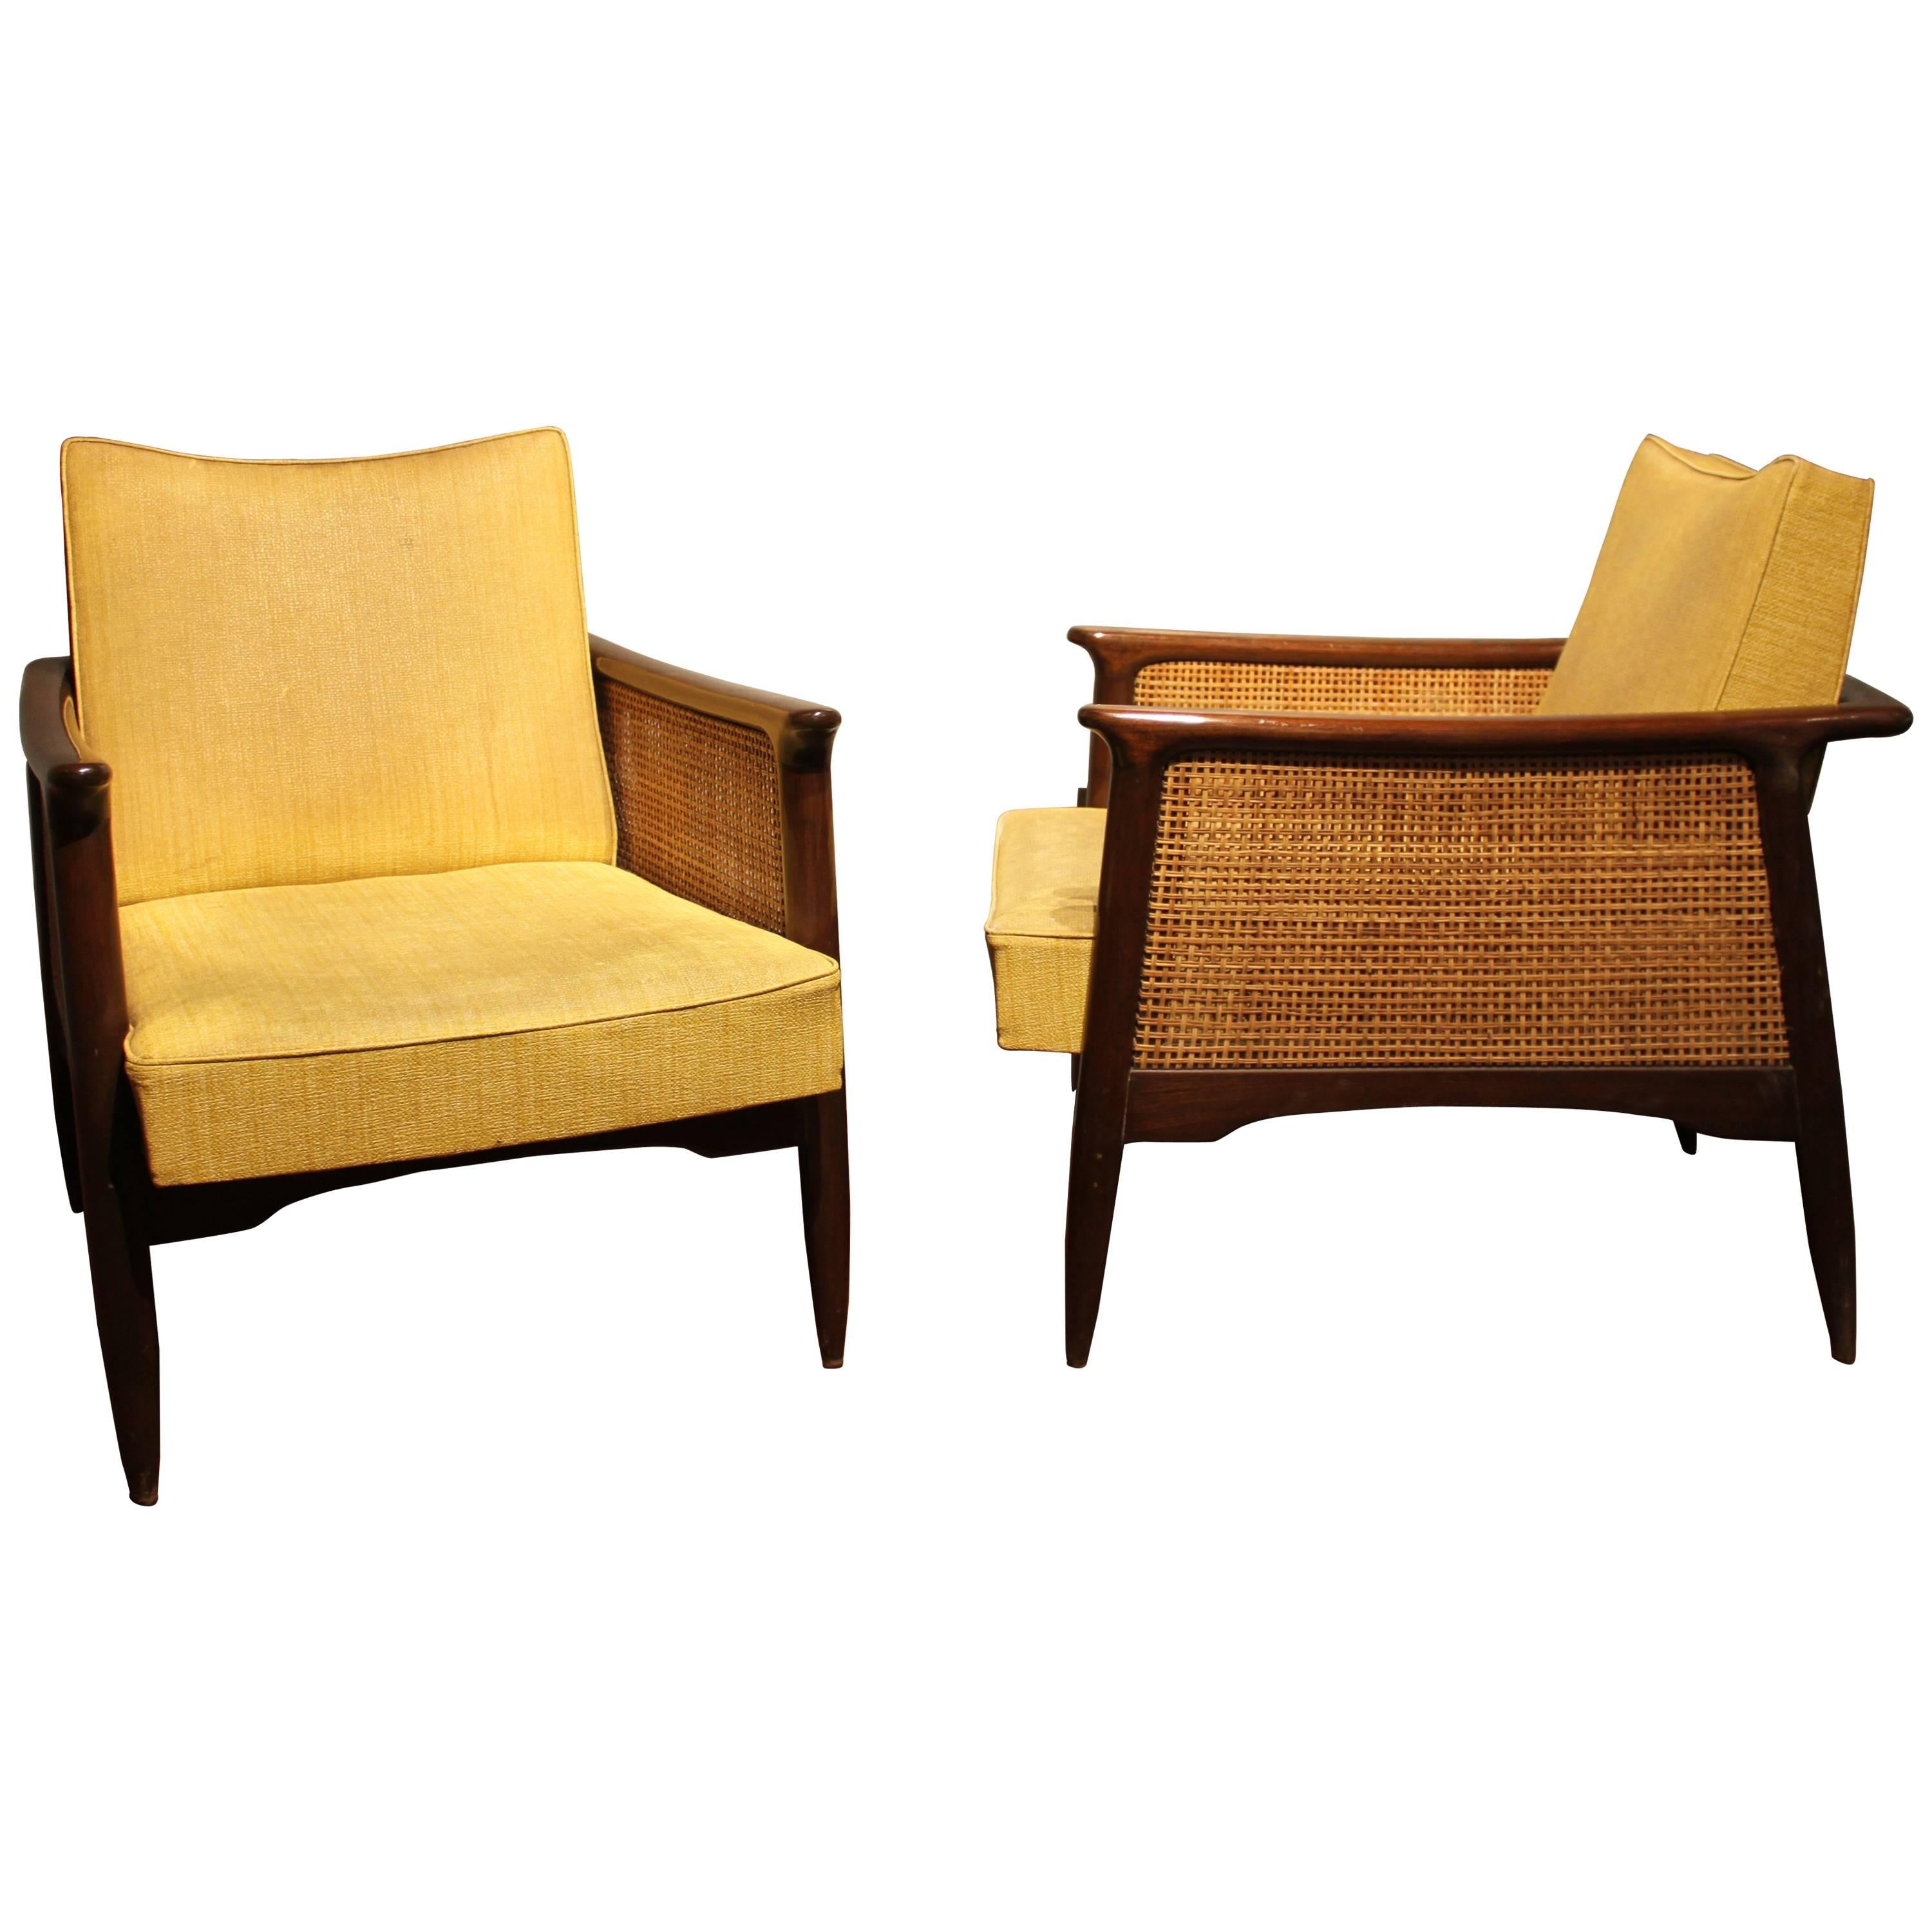 Rare and Unusual Pair of Mid-Century Modern Lounge Chairs